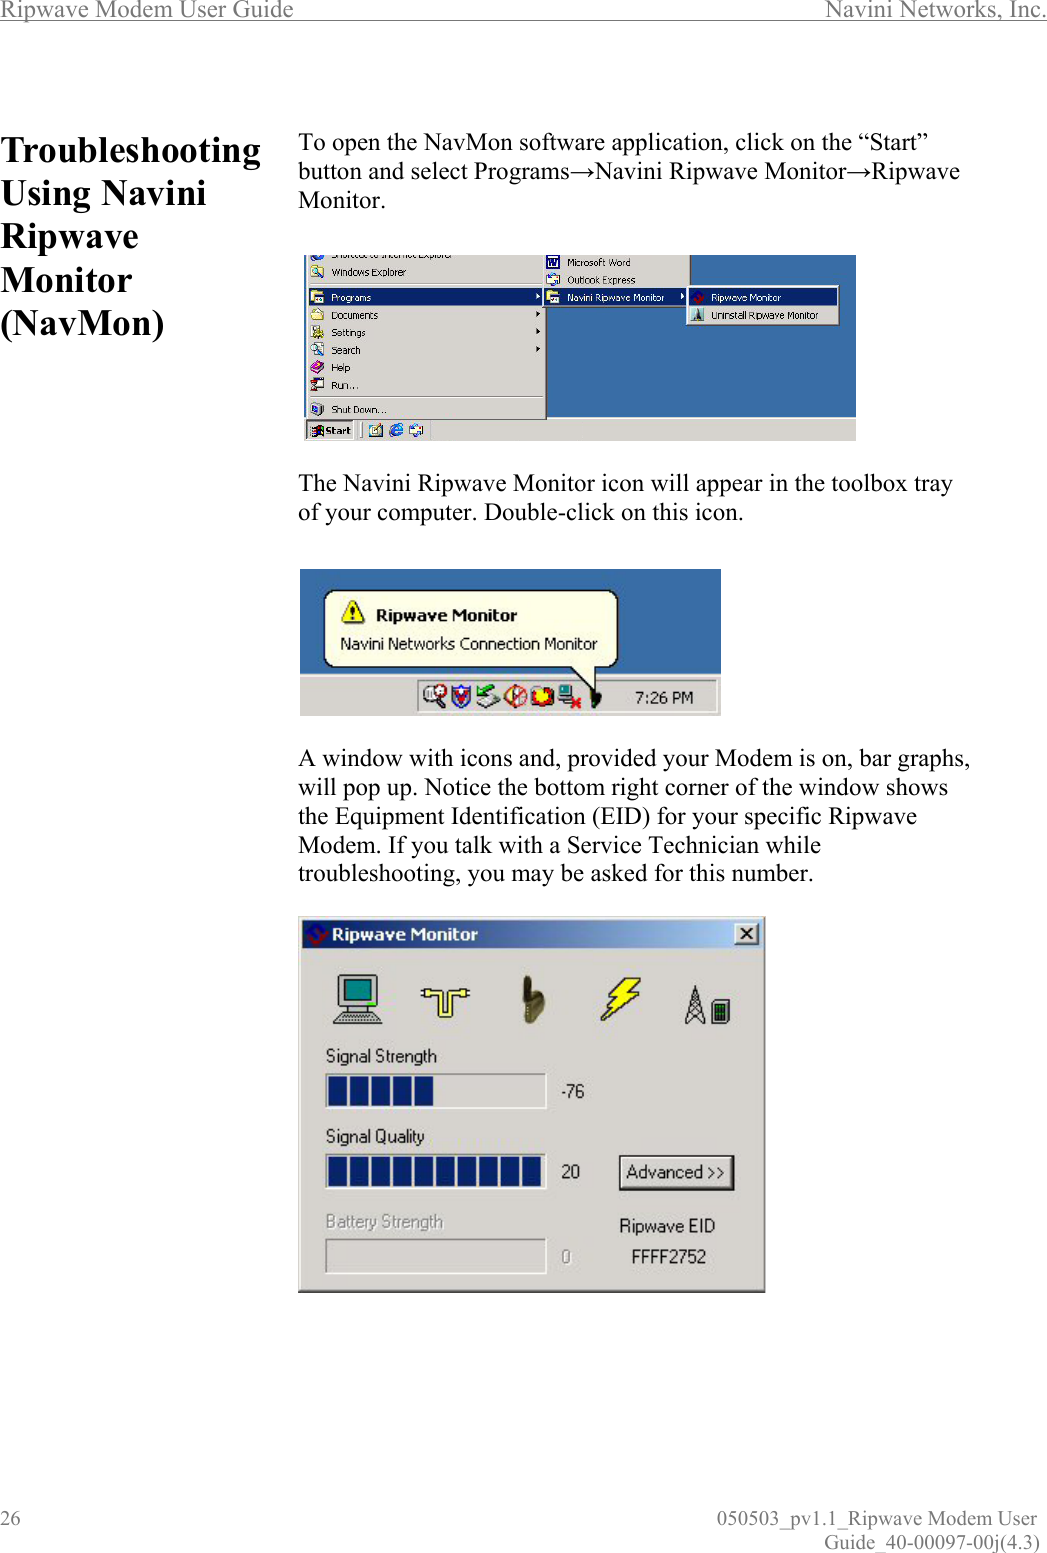 Ripwave Modem User Guide        Navini Networks, Inc. 26                          050503_pv1.1_Ripwave Modem User                                                                                                                                                               Guide_40-00097-00j(4.3)  TroubleshootingUsing Navini Ripwave Monitor (NavMon)                                        To open the NavMon software application, click on the “Start” button and select Programs→Navini Ripwave Monitor→Ripwave Monitor.     The Navini Ripwave Monitor icon will appear in the toolbox tray of your computer. Double-click on this icon.    A window with icons and, provided your Modem is on, bar graphs, will pop up. Notice the bottom right corner of the window shows the Equipment Identification (EID) for your specific Ripwave Modem. If you talk with a Service Technician while troubleshooting, you may be asked for this number.                